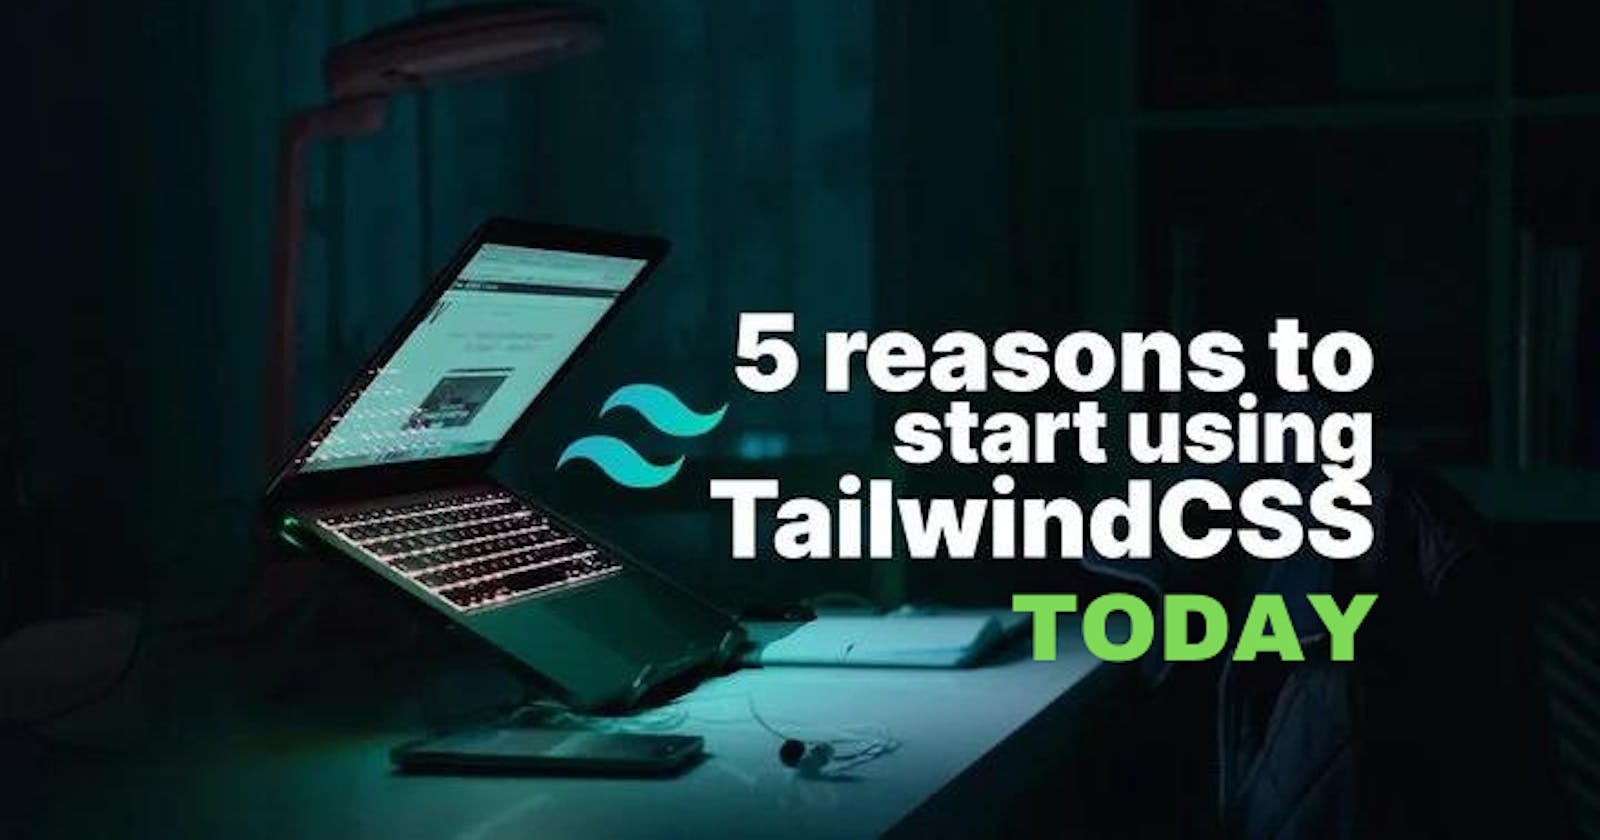 Revolutionize Your Web Development Workflow with TailwindCSS: 5 Reasons Why It's Your Go-To Styling Framework